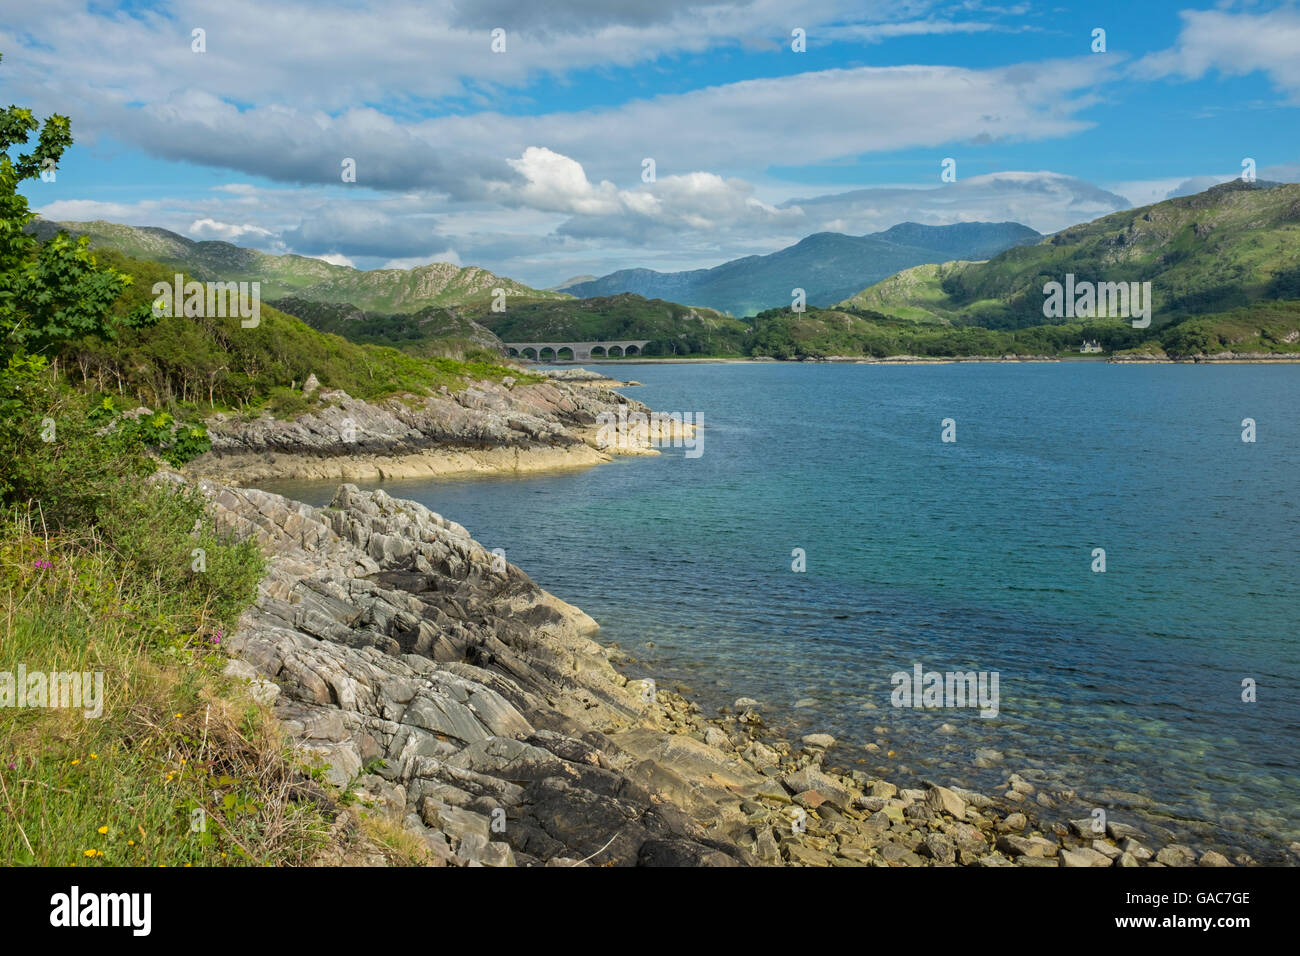 The eastern end of Loch Nan Uamh on the west coast of Scotland. Stock Photo